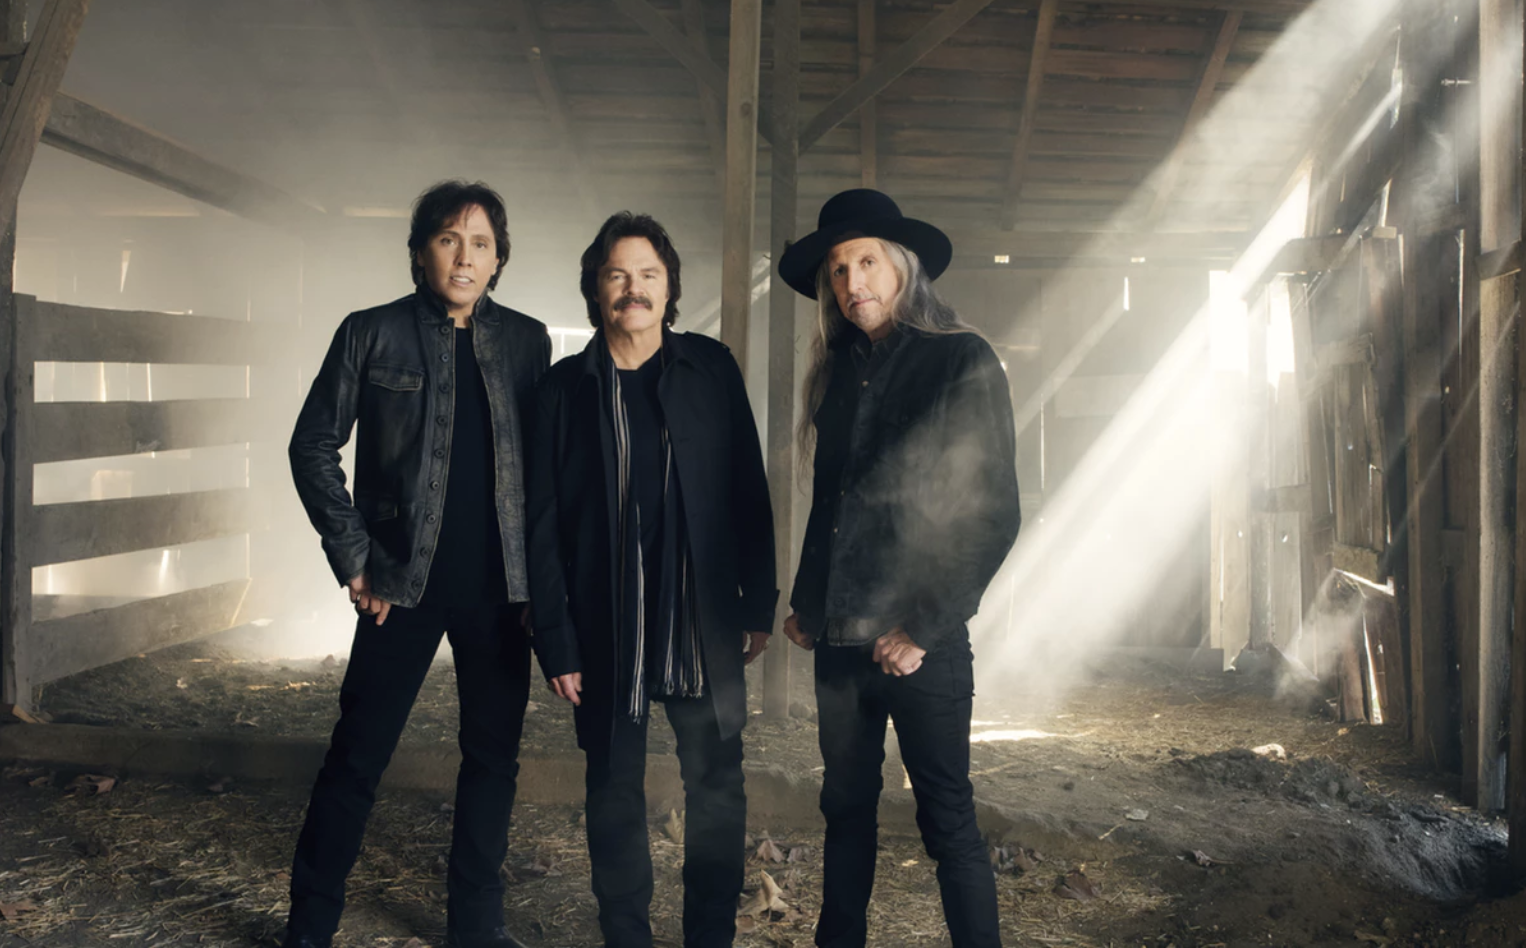 The Doobie Brothers at Wente Estate Winery